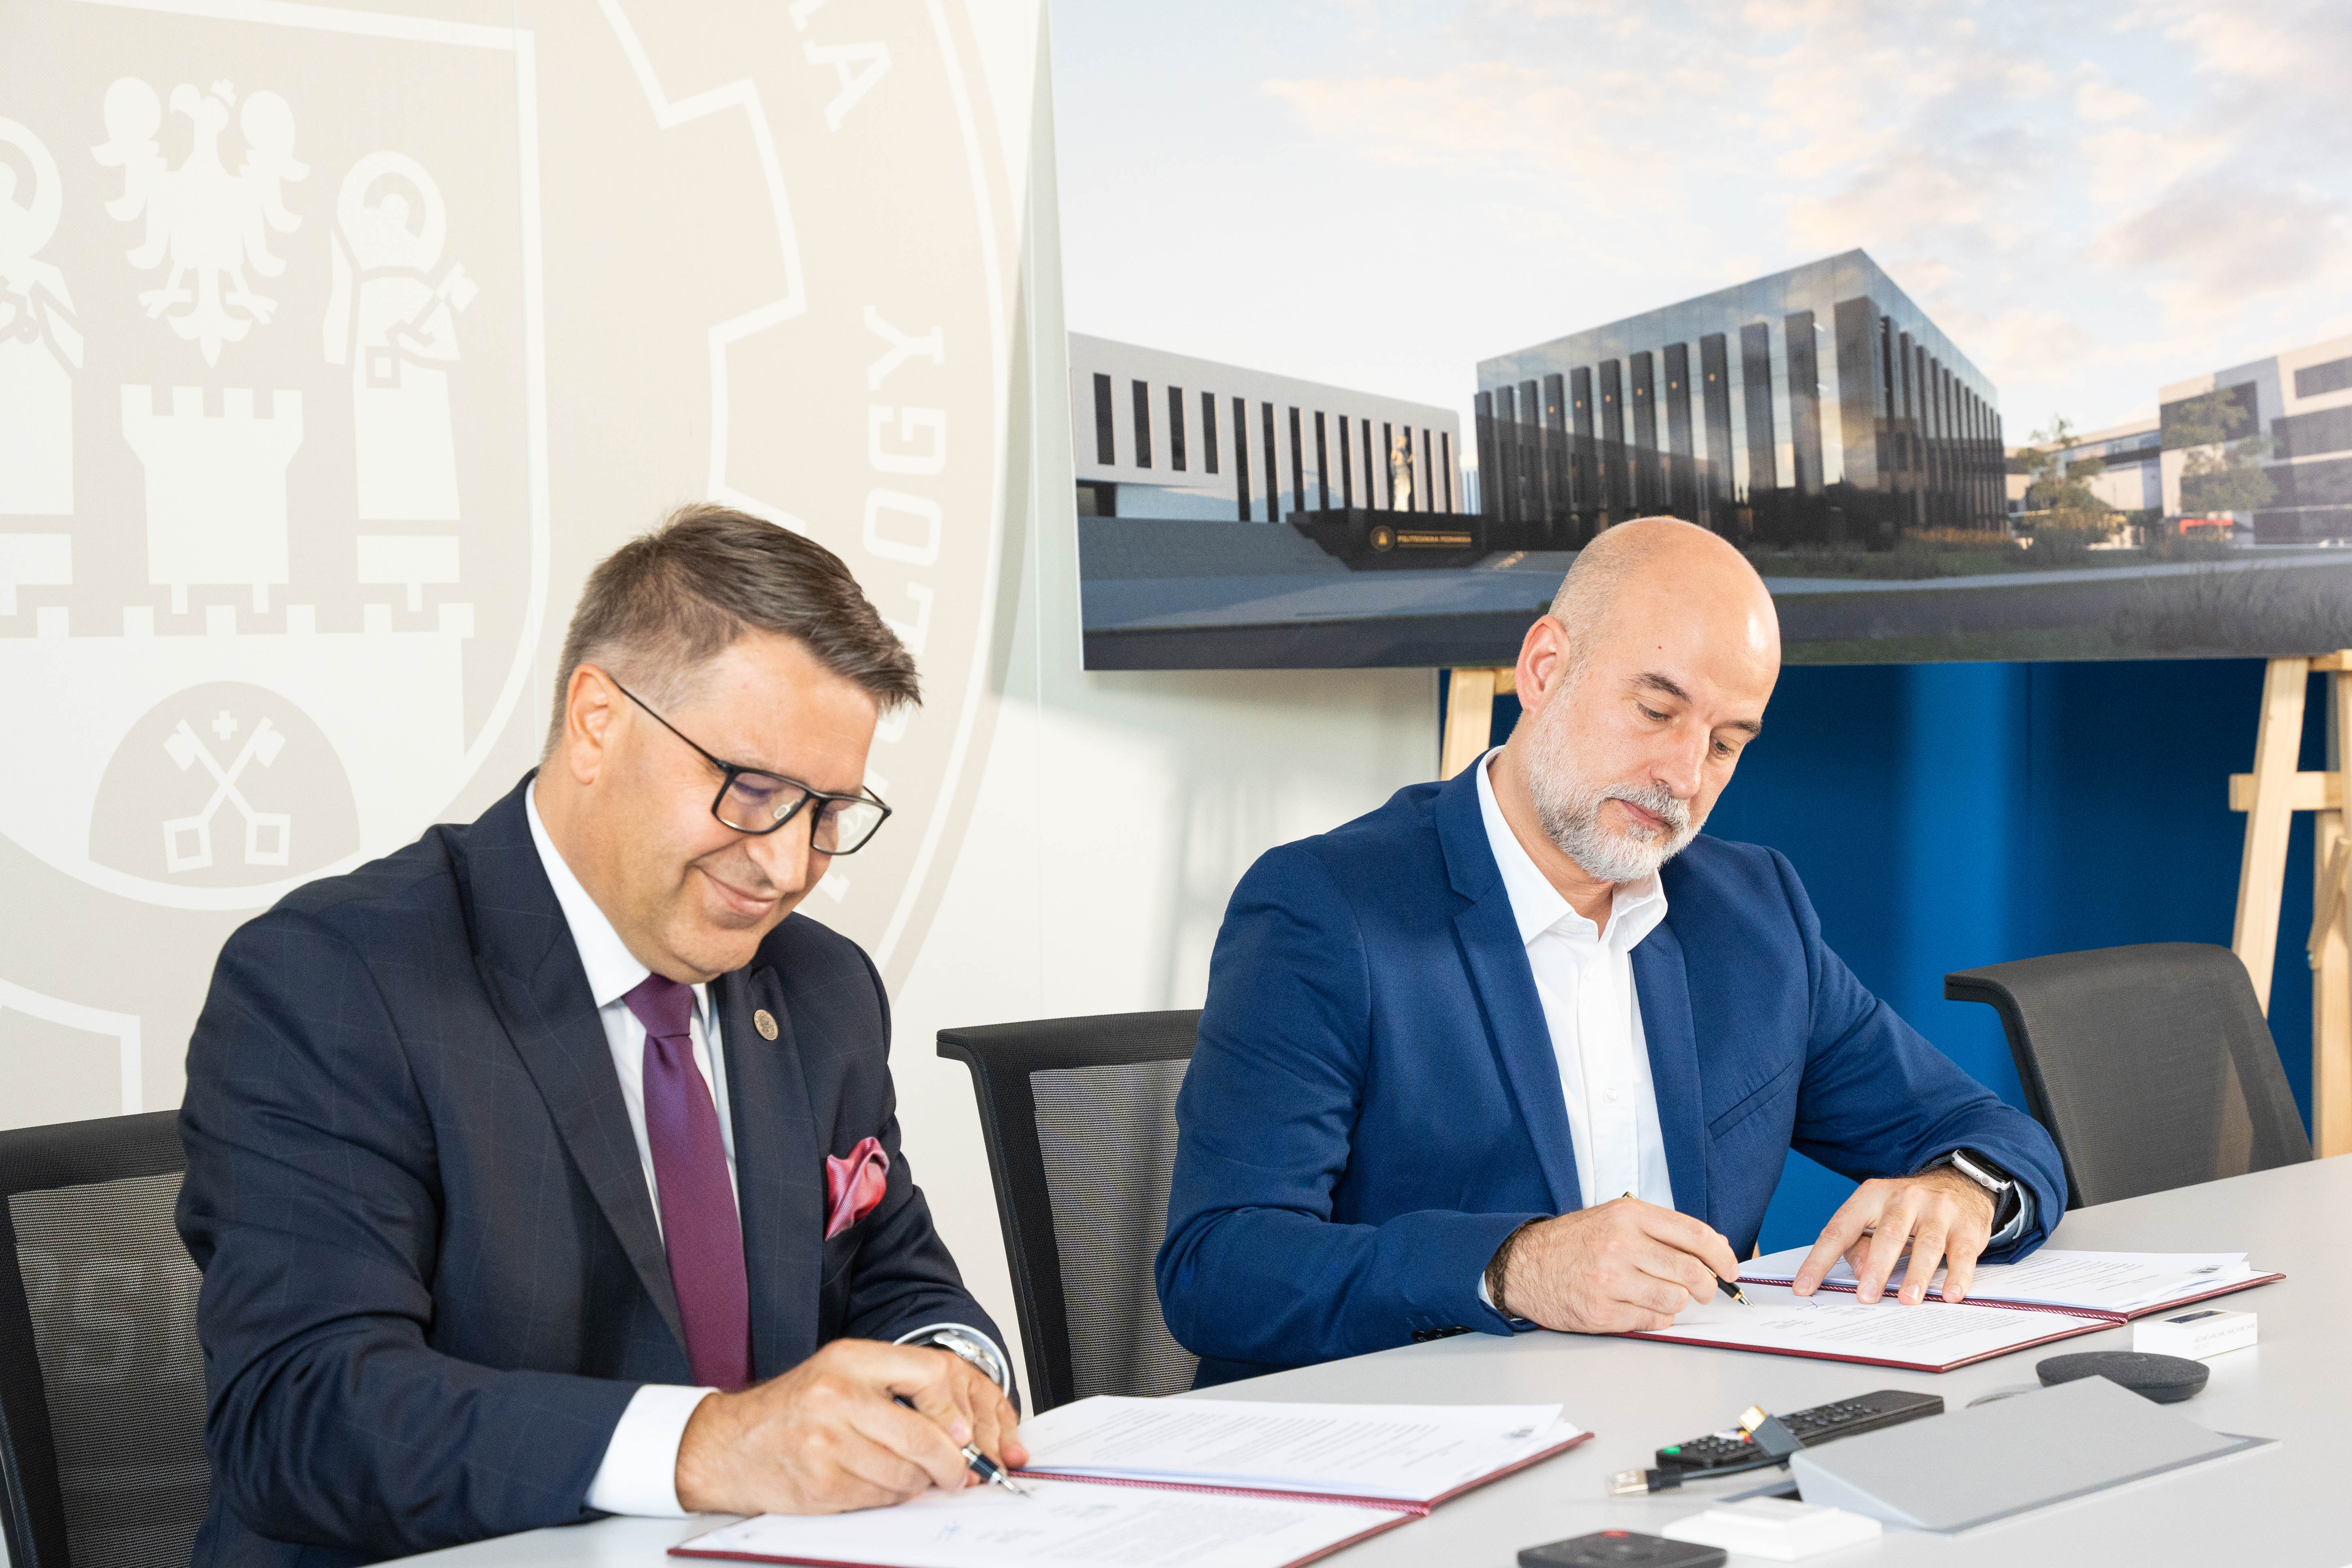 Rector of Poznań University of Technology and Vice President of the Board of Mostostal Warszawa are signing the contract